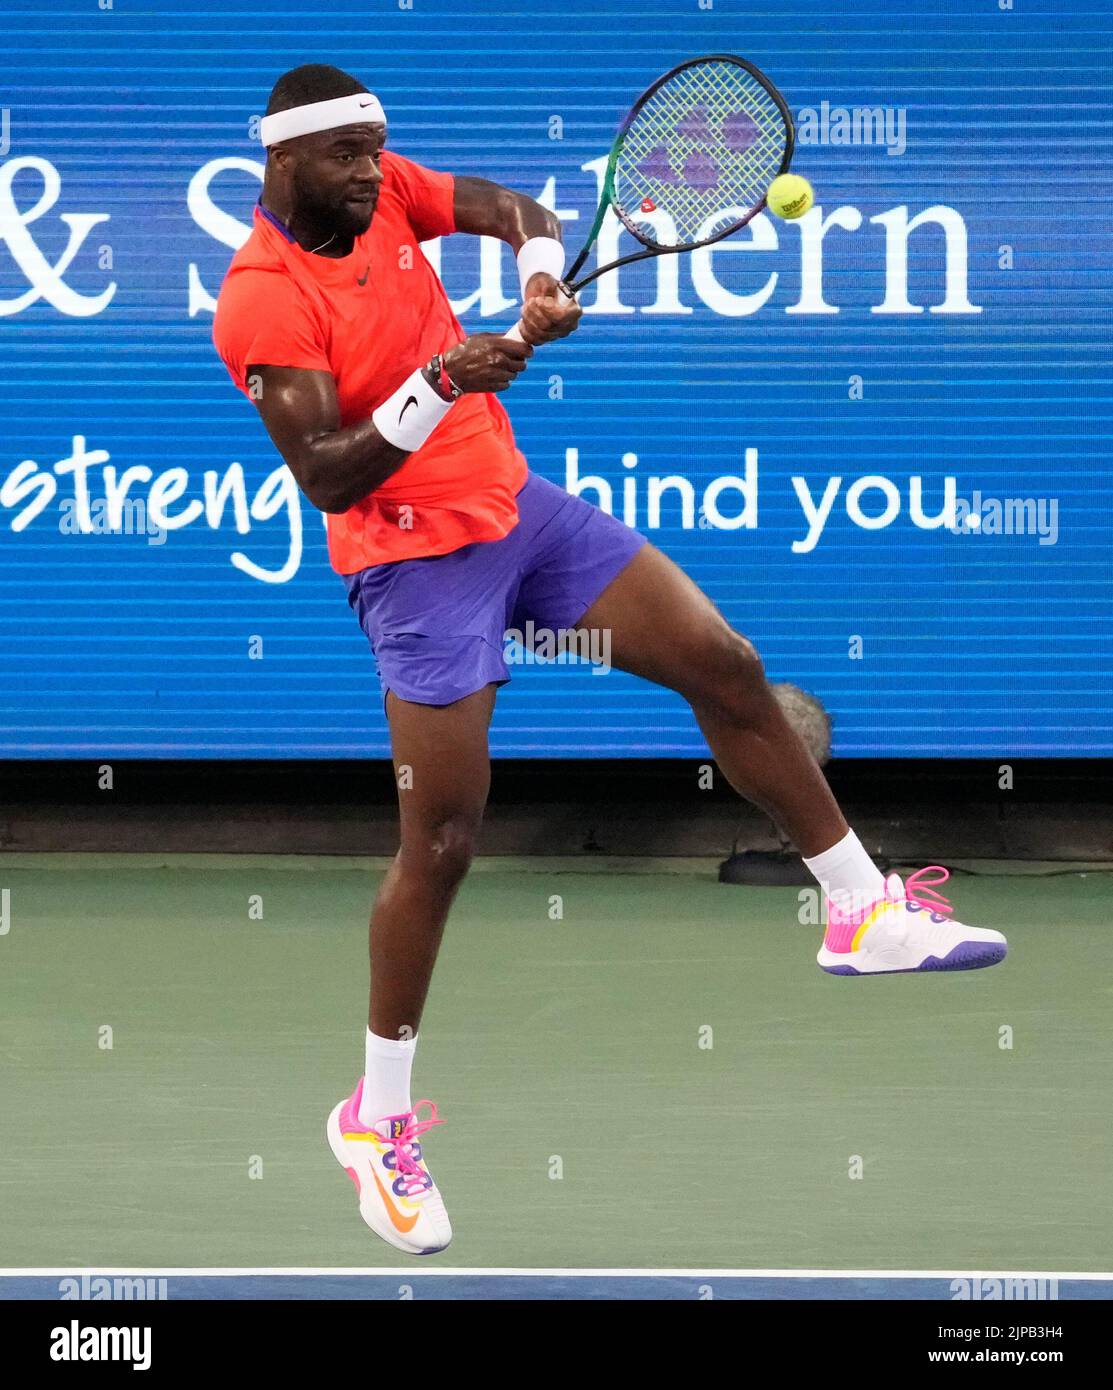 August 15, 2022: Frances Tiafoe (USA) defeated Matteo Berrettini (ITA) 7-6, 6-4, 7-6 at the Western & Southern Open being played at Lindner Family Tennis Center in Cincinnati, Ohio/USA © Leslie Billman/Tennisclix/Cal Sport Media Stock Photo